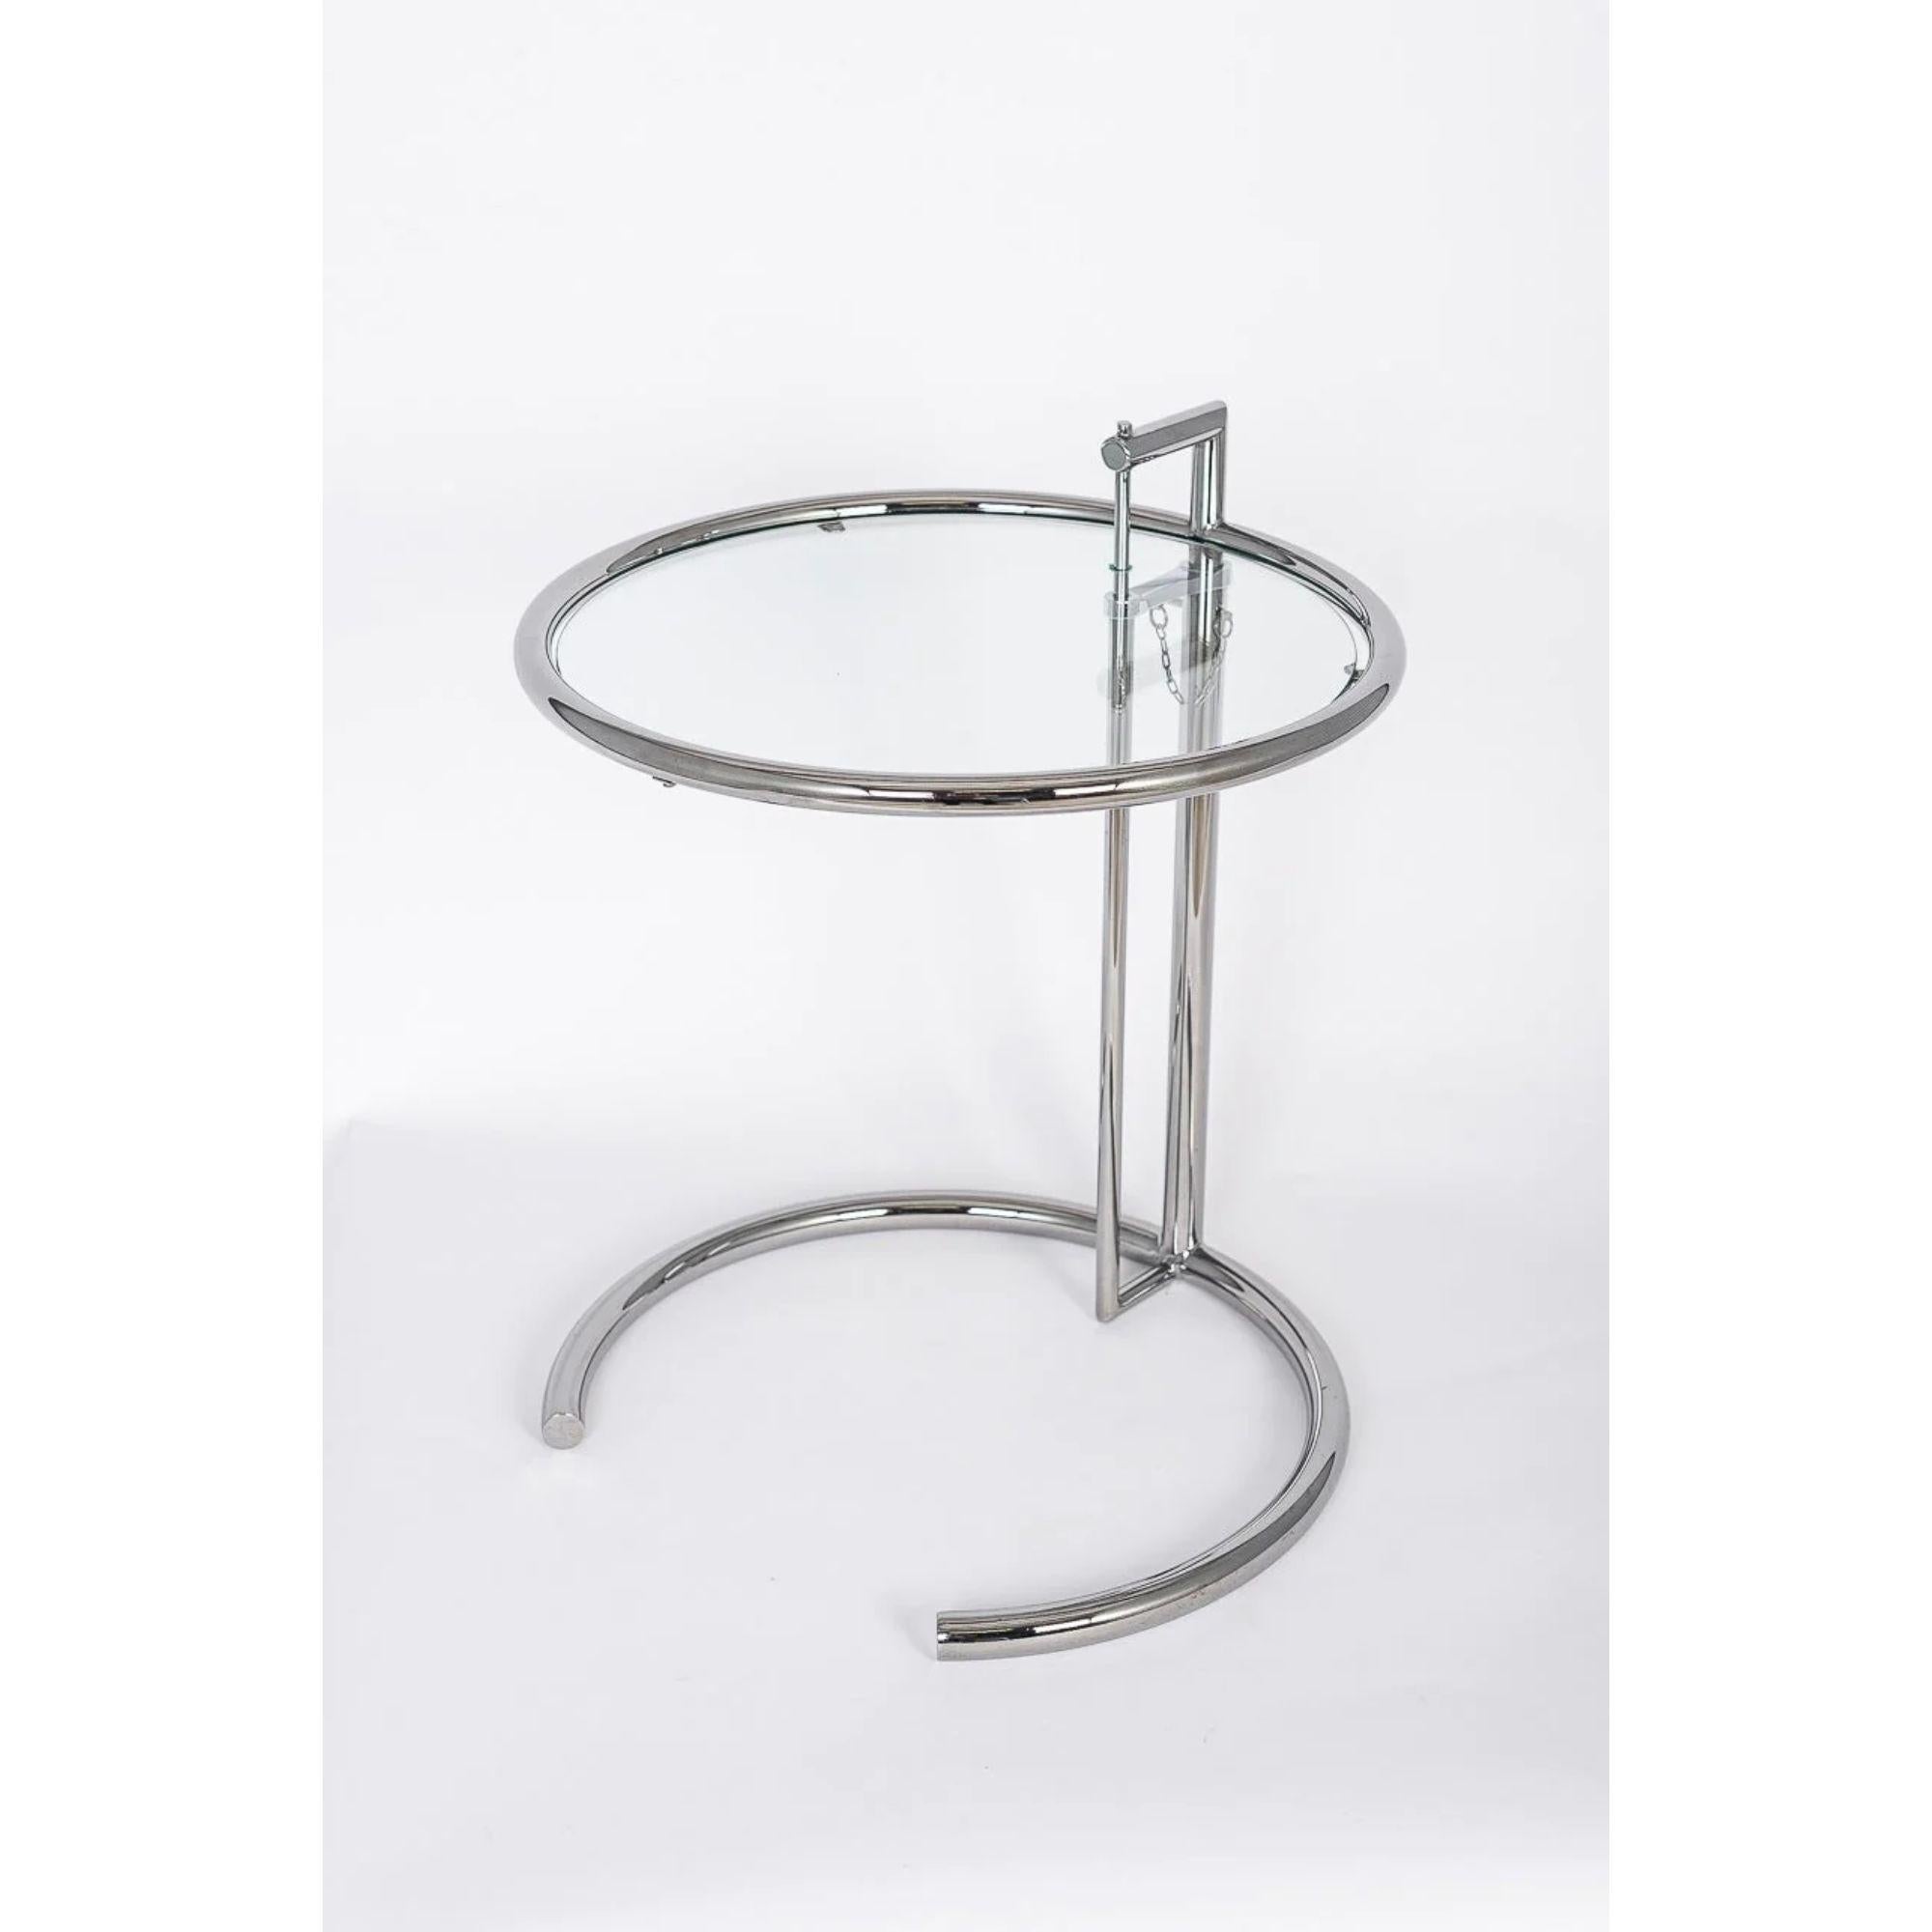 Midcentury Bauhaus E1027 steel and glass side table by Eileen Gray.

This vintage tubular steel and glass E1027 end table was designed by Eileen Gray in 1926. The ingenious design features a chrome-plated tubular steel frame with circular glass